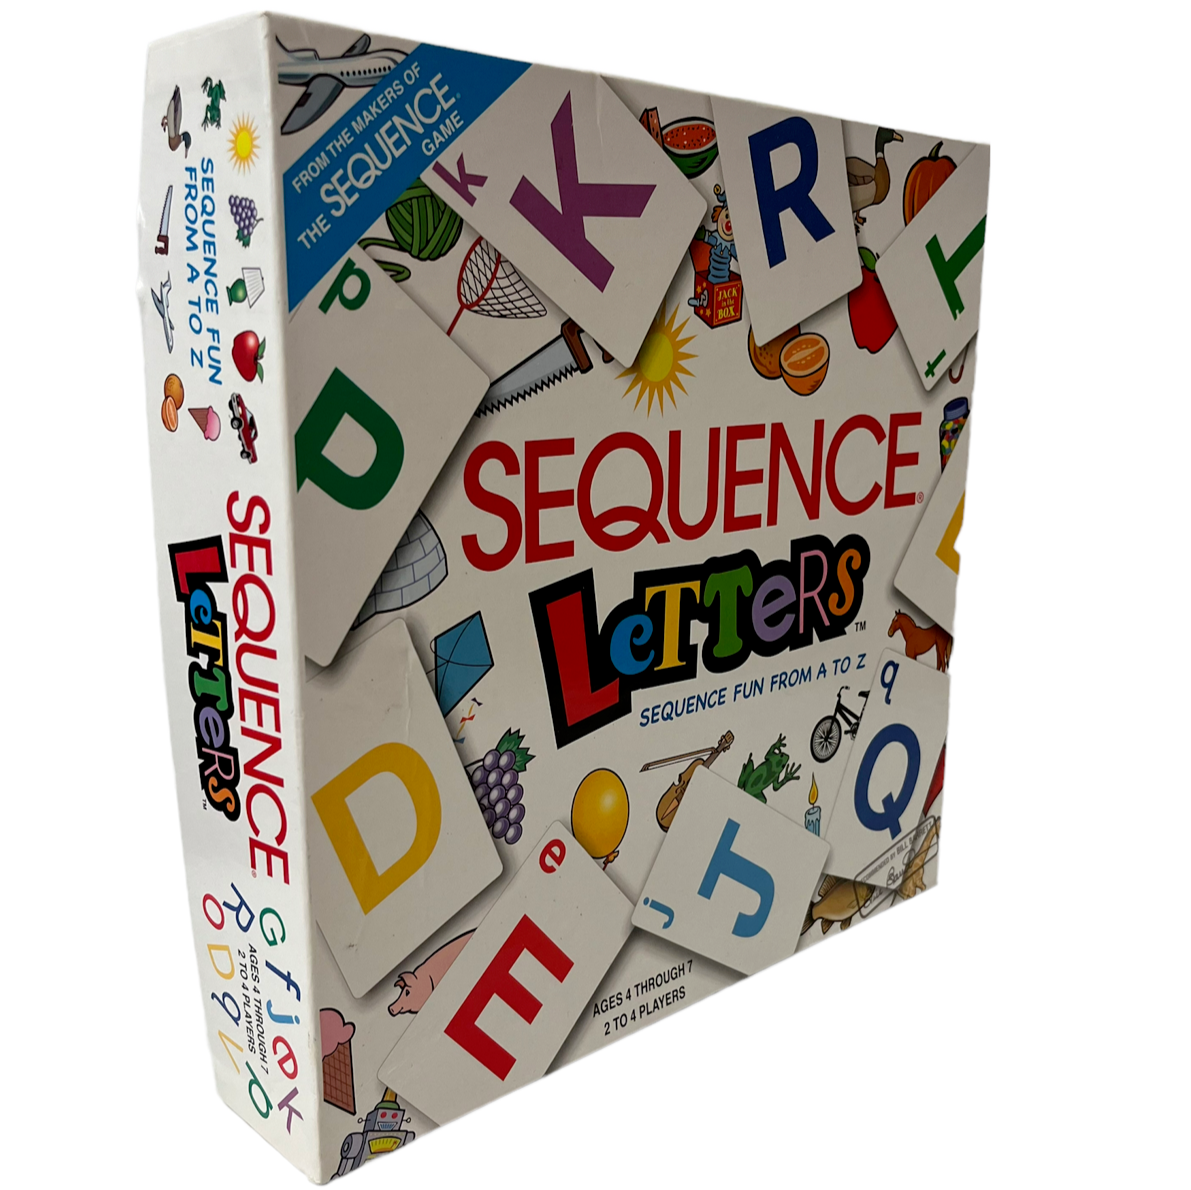 Sequence Letters Fun From A To Z Great Learning Game For Kids Very Nice 2009 - $10.31